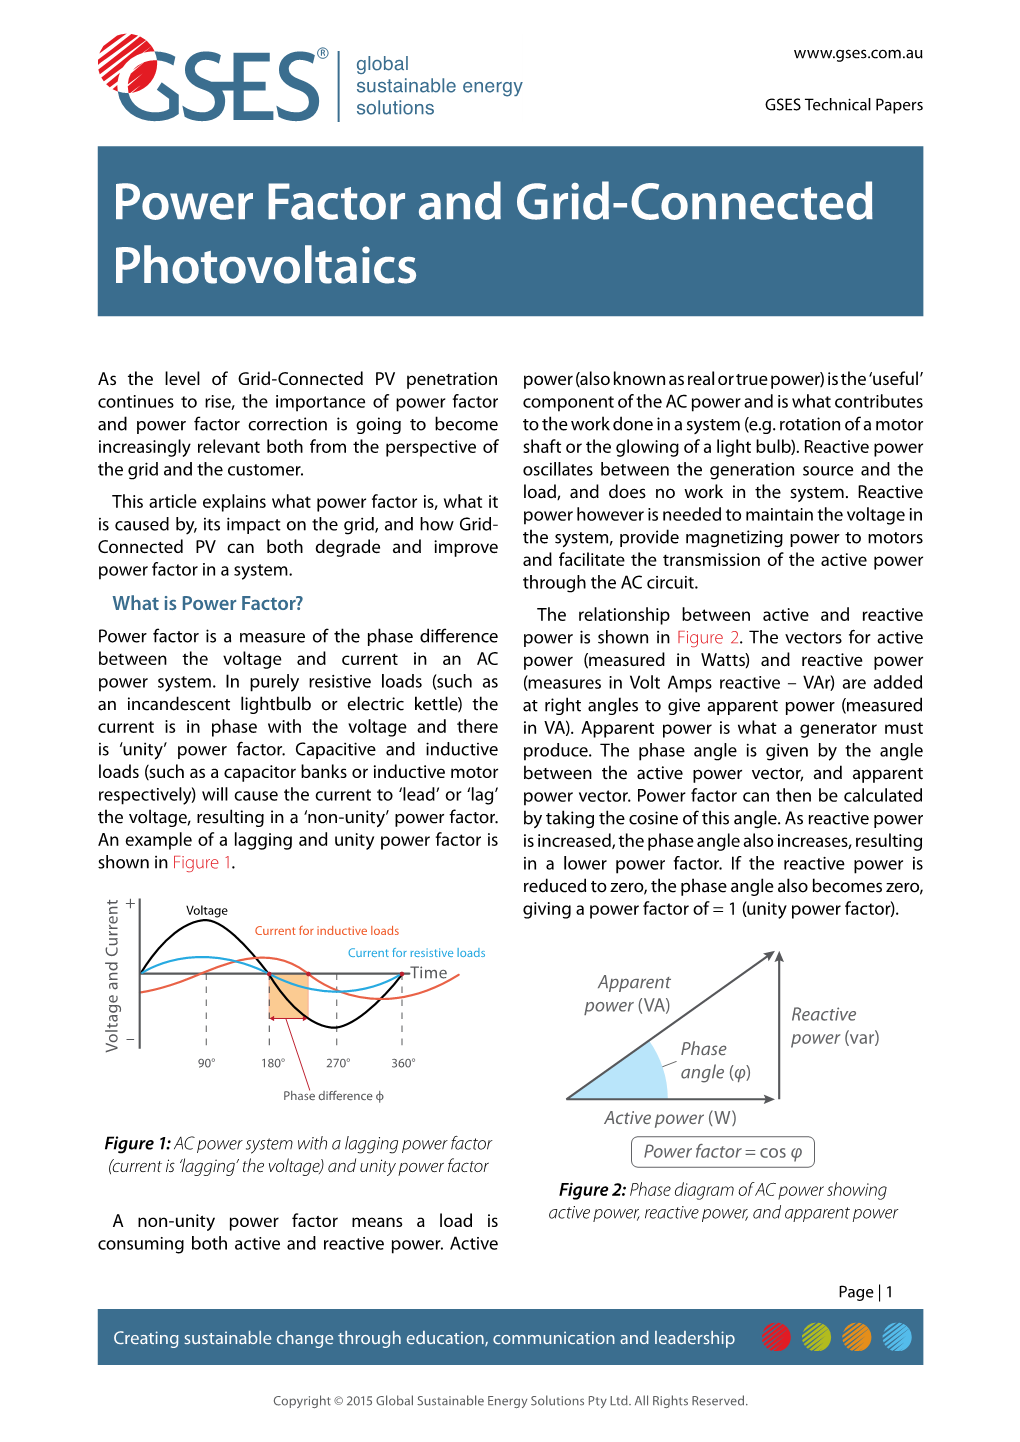 Power Factor and Grid-Connected Photovoltaics